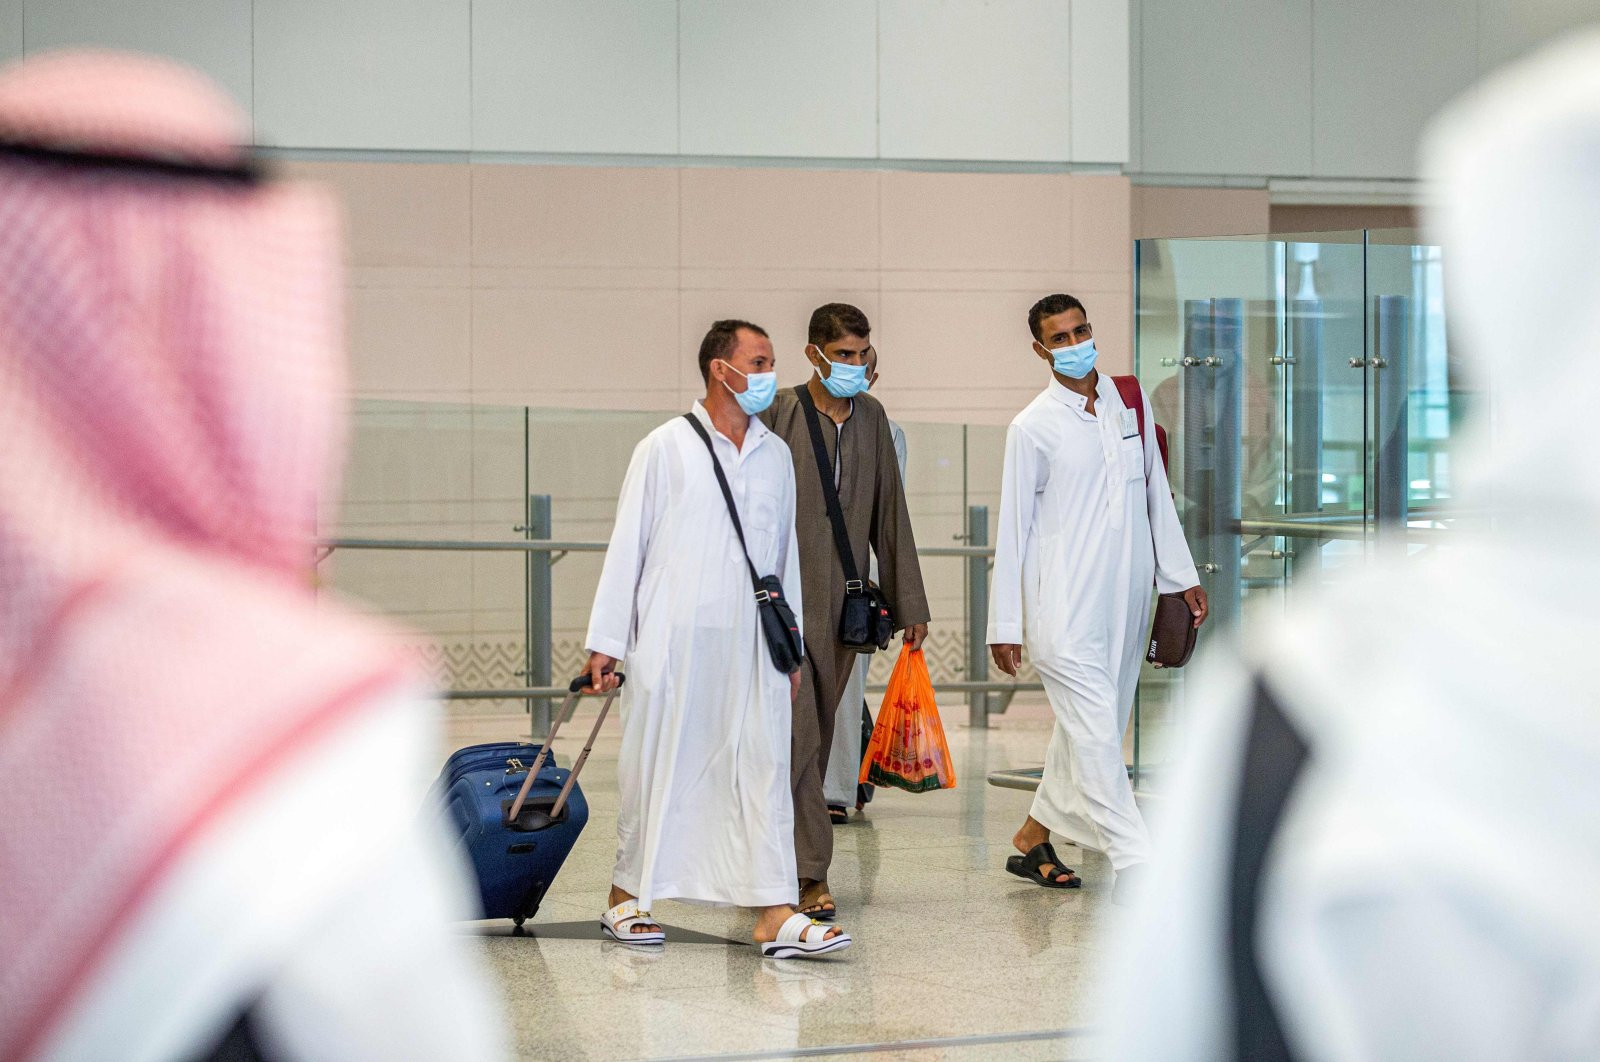 A handout picture provided by the Saudi Ministry of Hajj and Umra on July 25, 2020, shows travellers, mask-clad due to the COVID-19 coronavirus pandemic, walking with luggage as part of the first group of arrivals for the annual Hajj pilgrimage, at the Red Sea coastal city of Jeddah's King Abdulaziz International Airport.(AFP Photo)